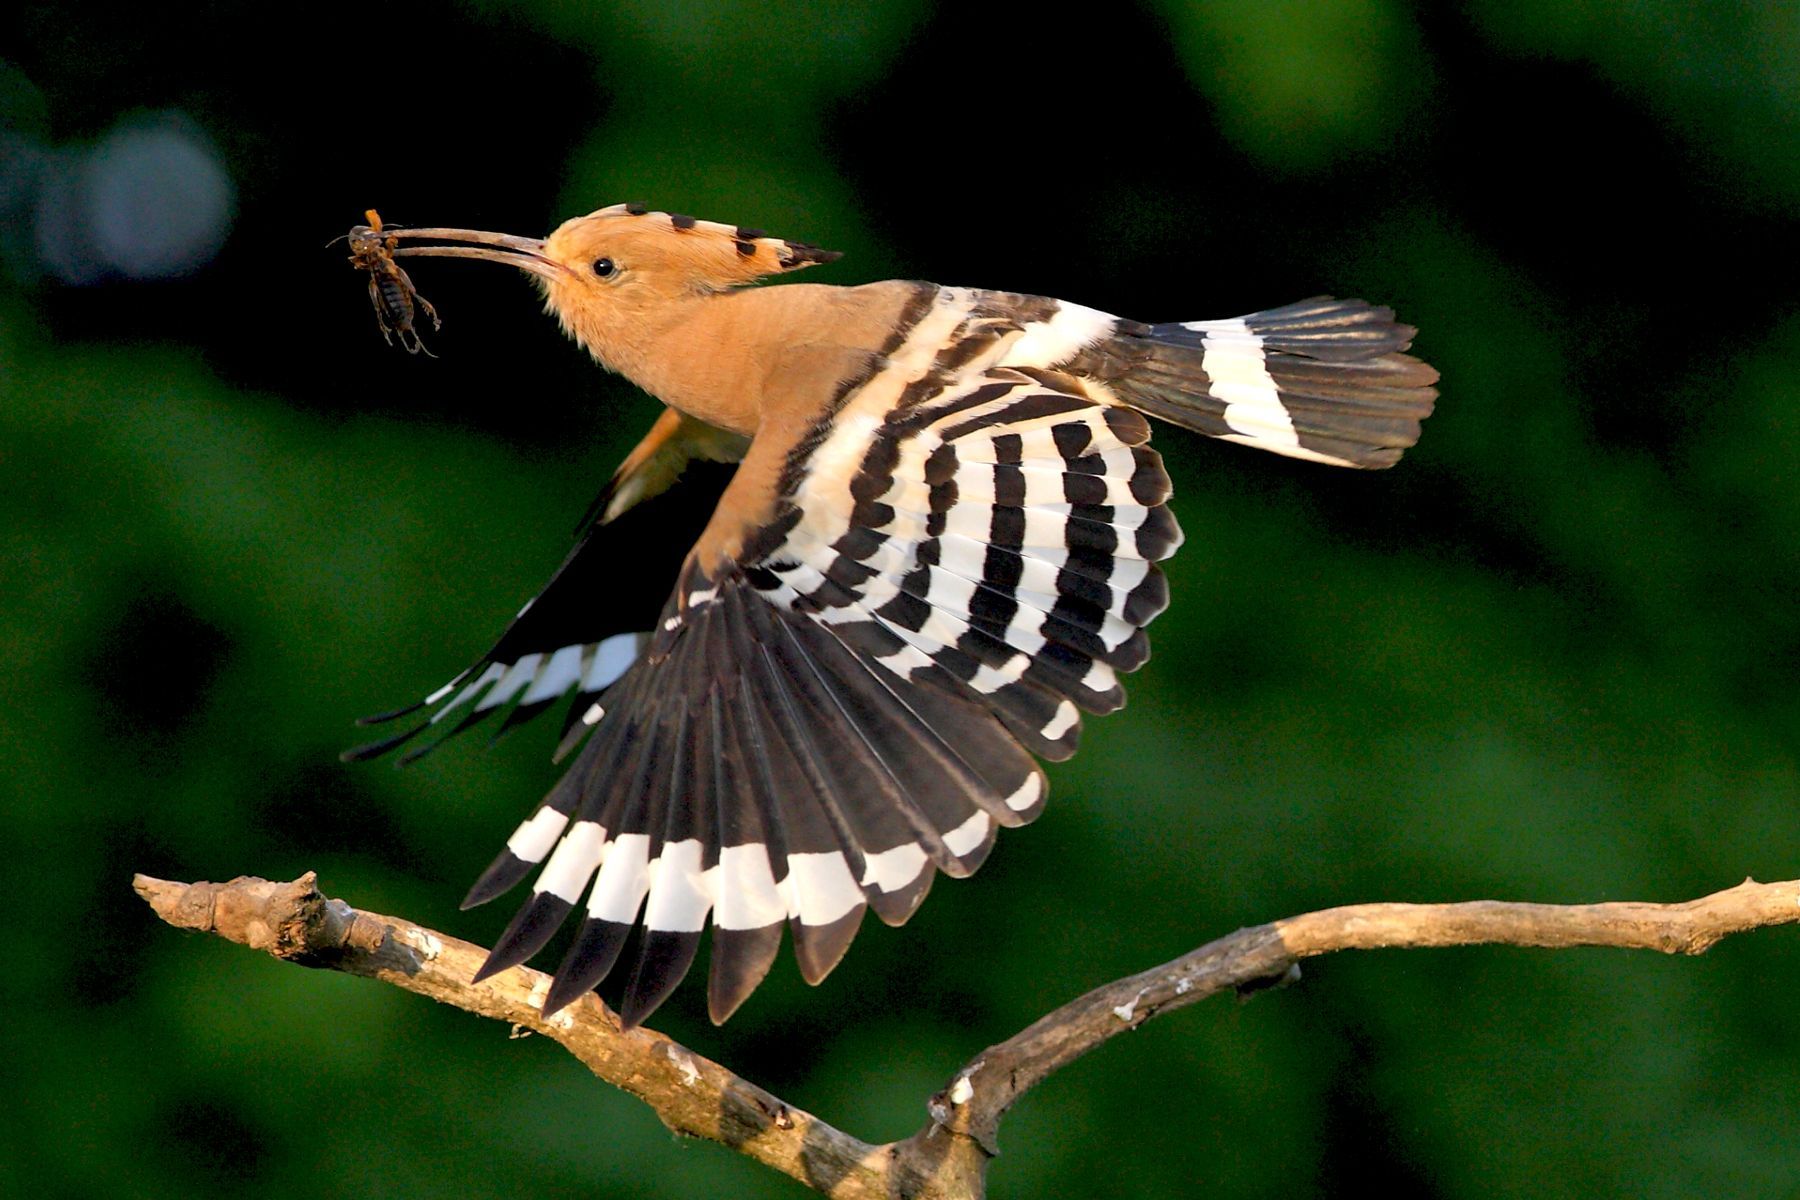 Eurasian Hoopoes are common in Hungary